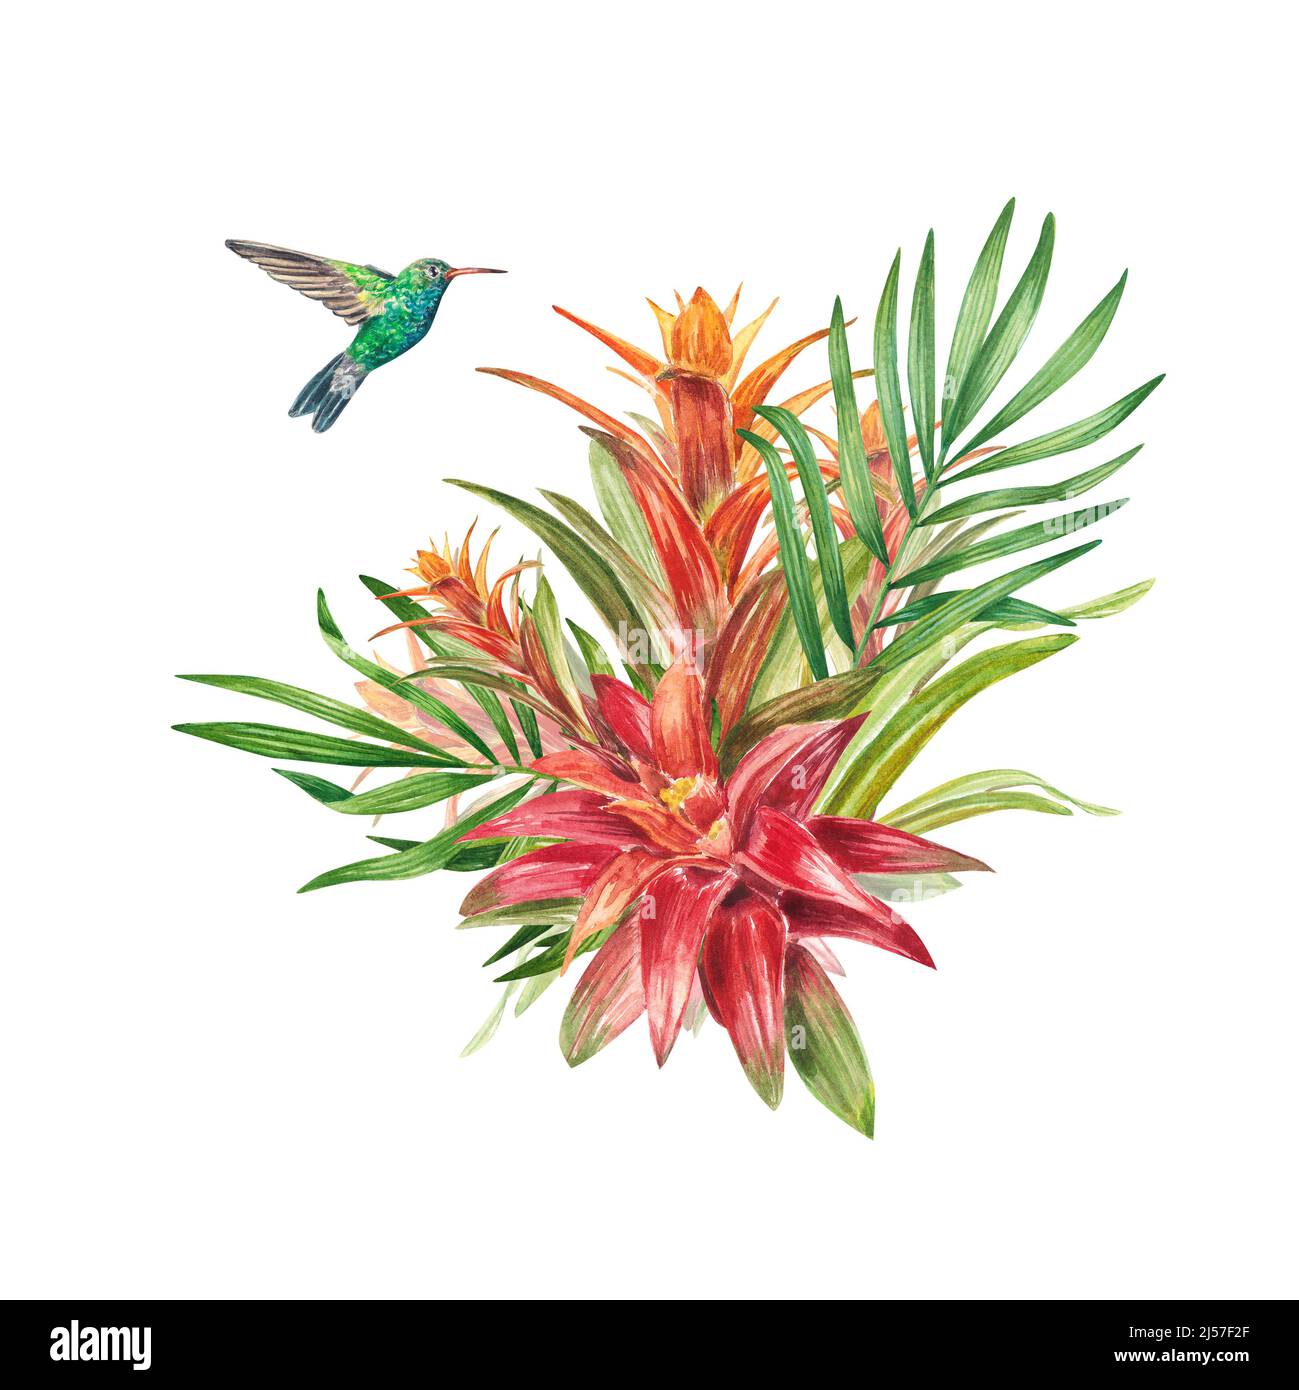 A tropical bromeliad plant with red leaves and a hummingbird, painted in watercolor. The illustration is highlighted on a white background. Spring or Stock Photo